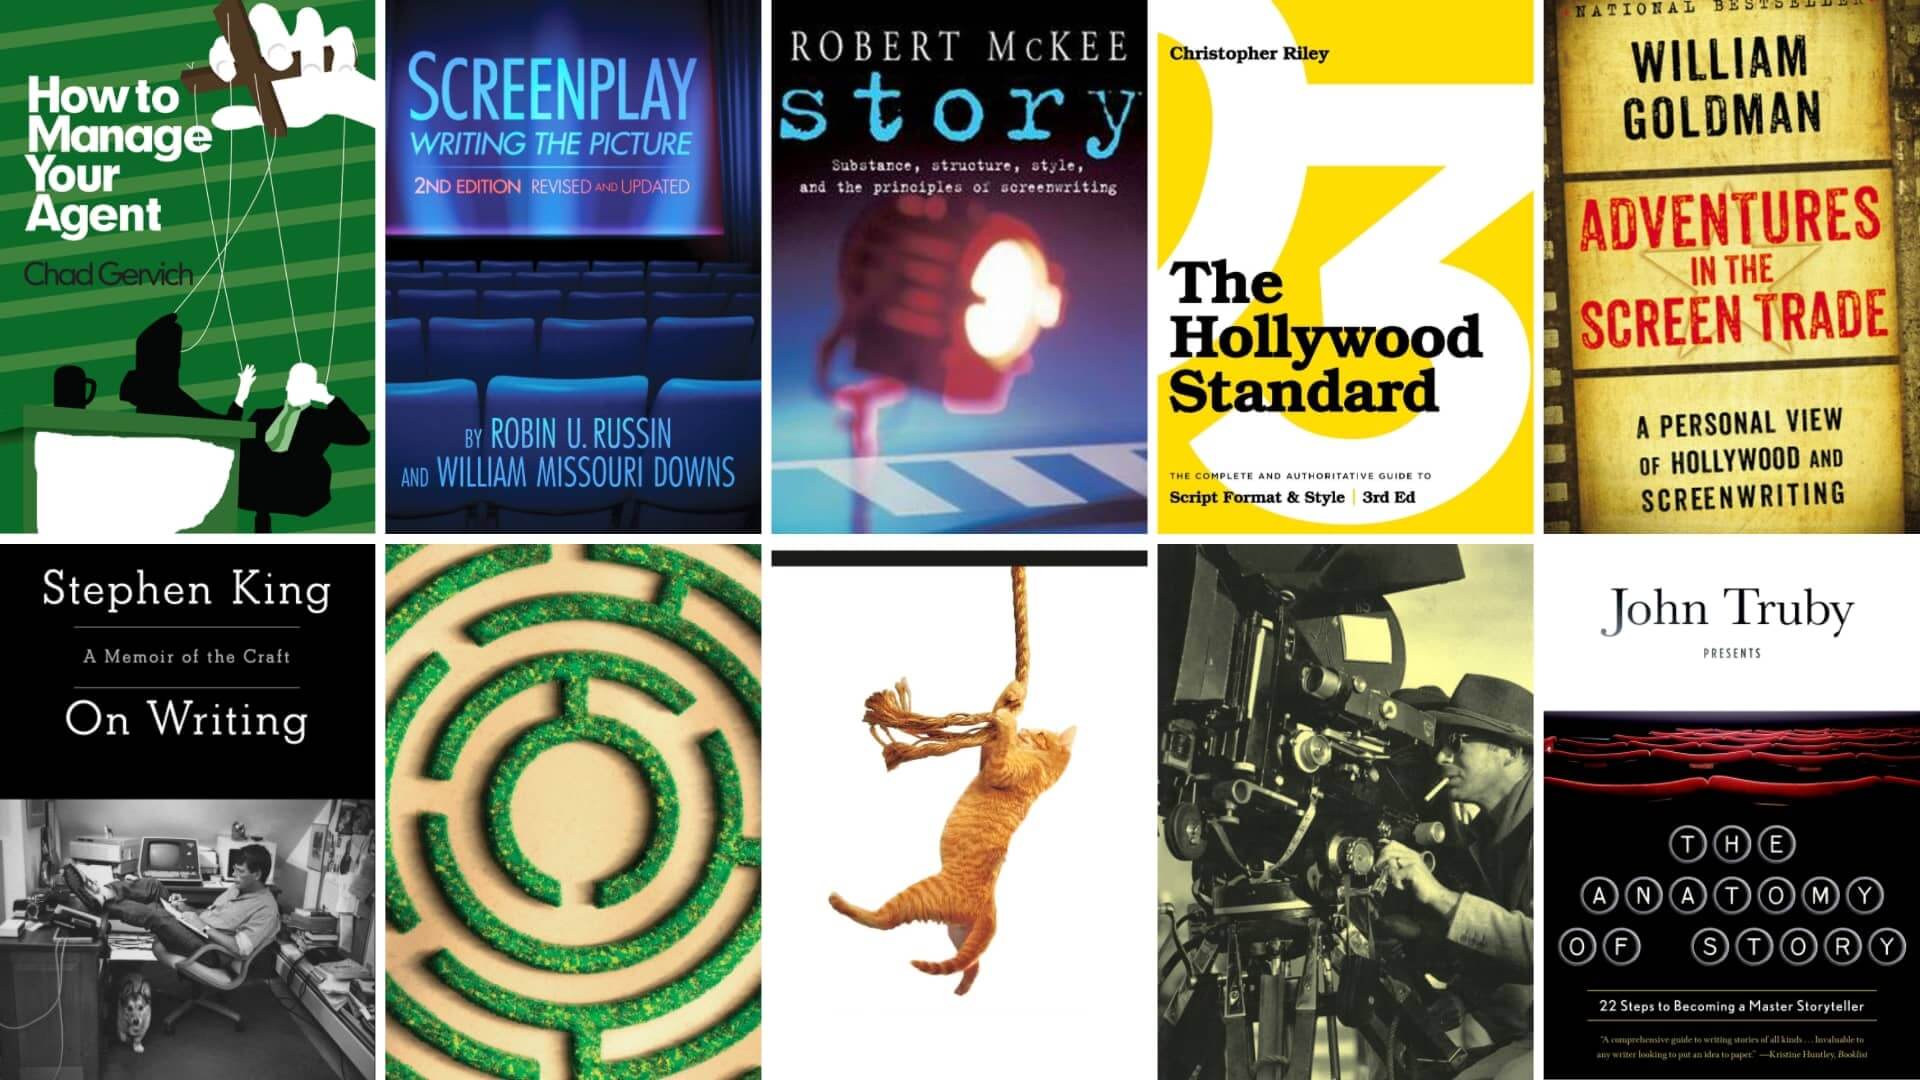 A Complete Reference of Format & Style The Screenwriters Manual 